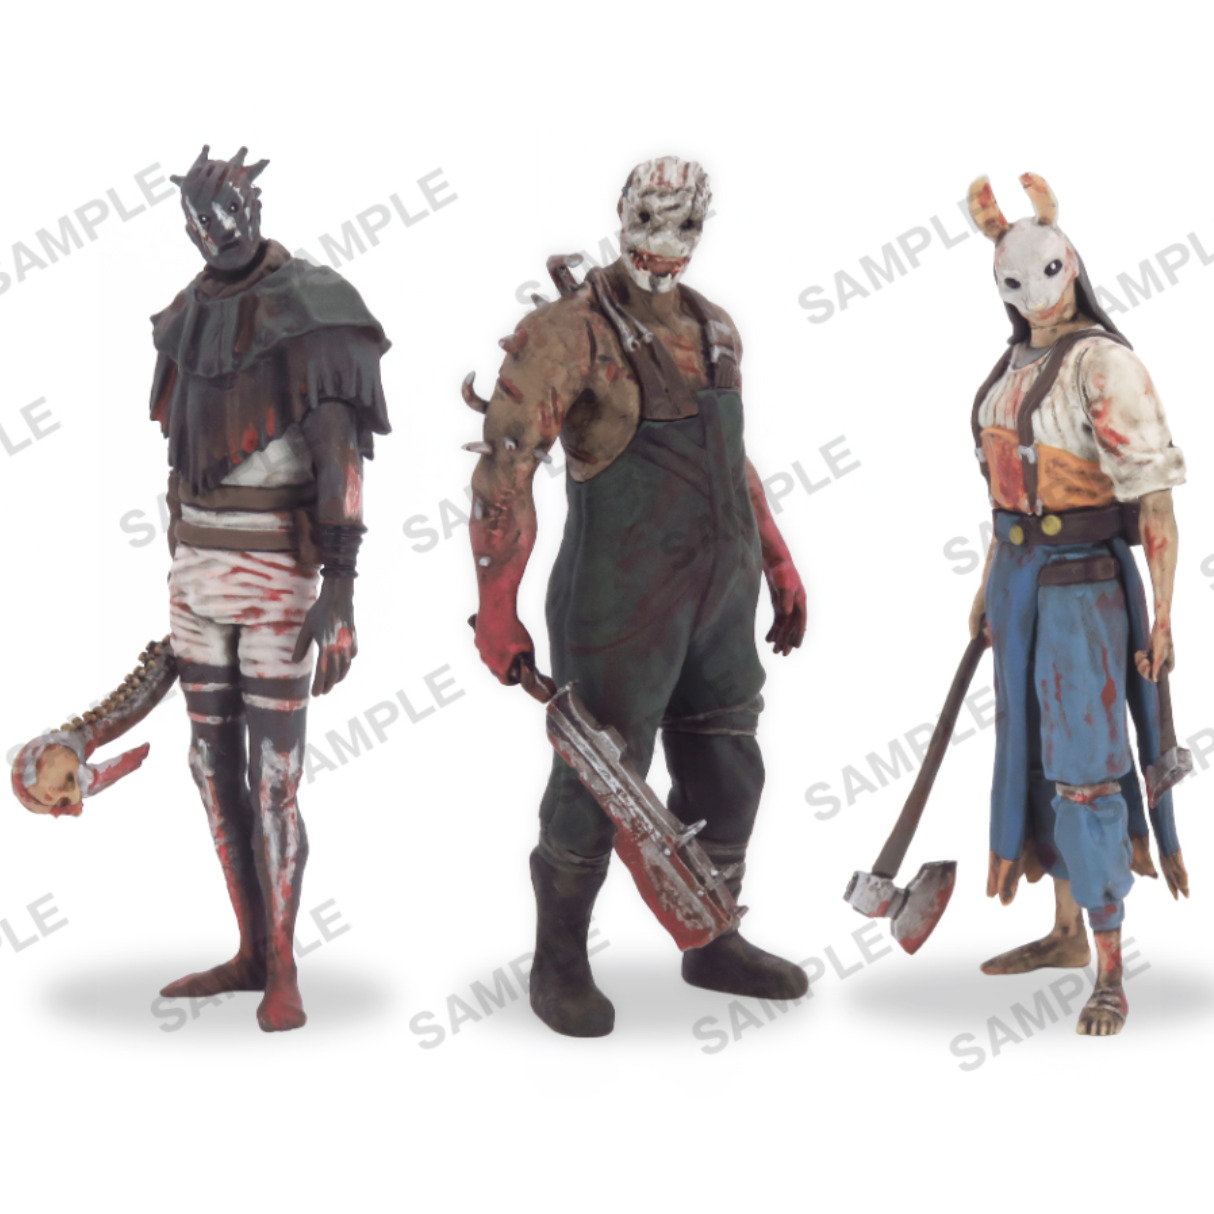 Dead by Daylight Premium Capsule Figure The Trapper Wraith Huntress Complete Set